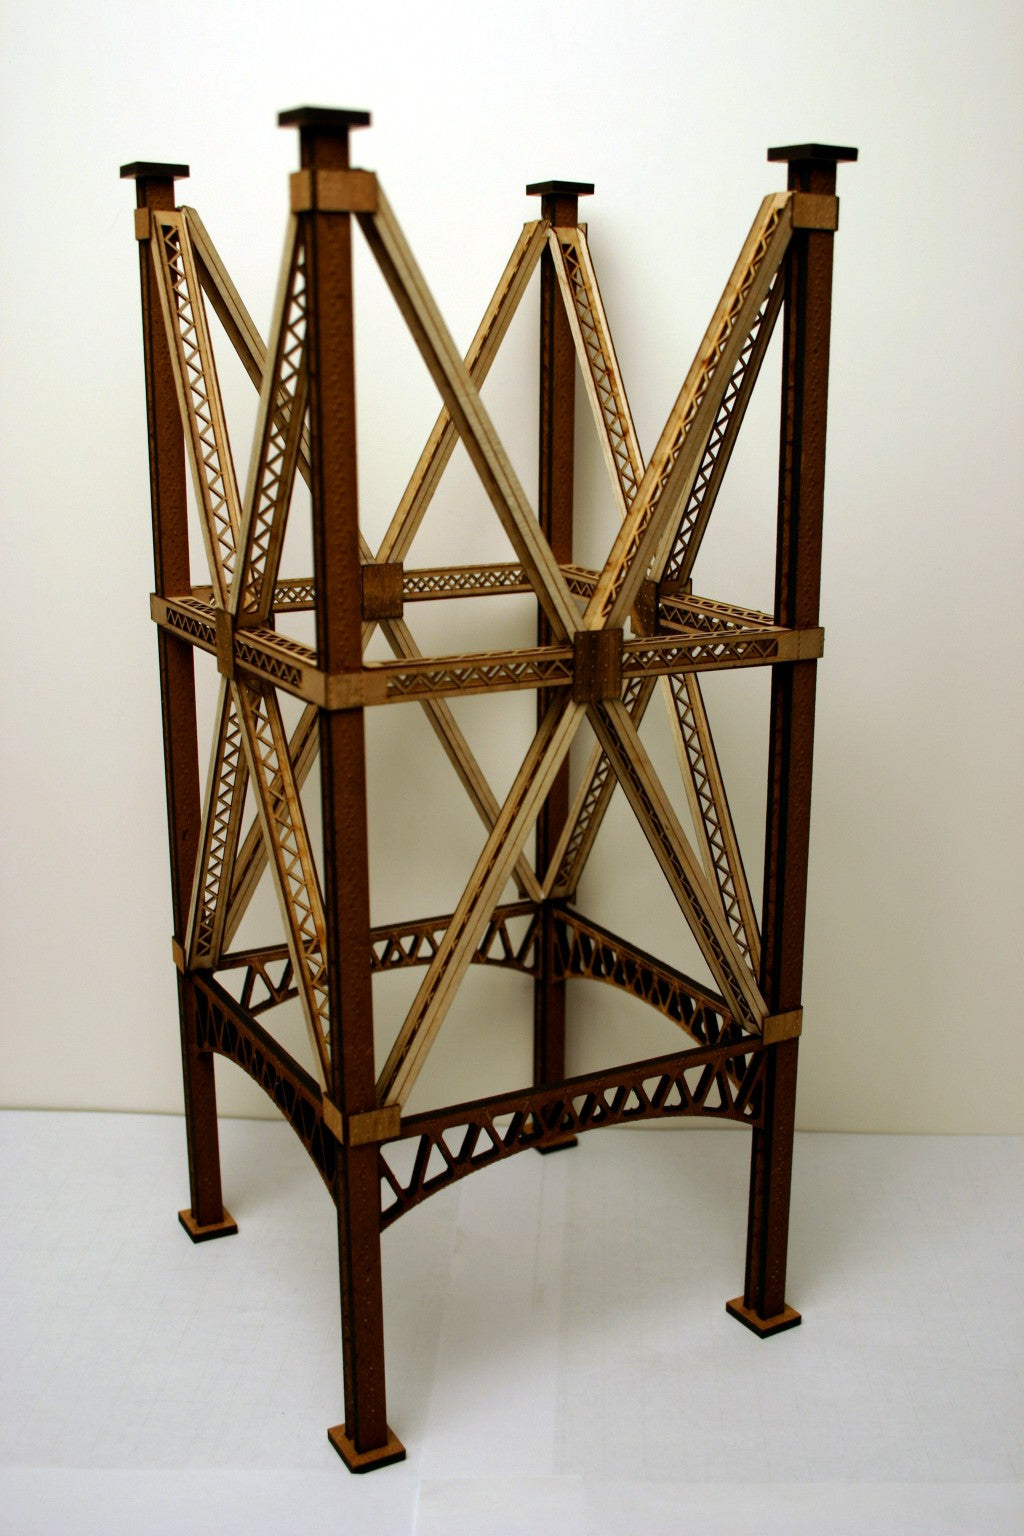 Structural Support Tower - ITLA